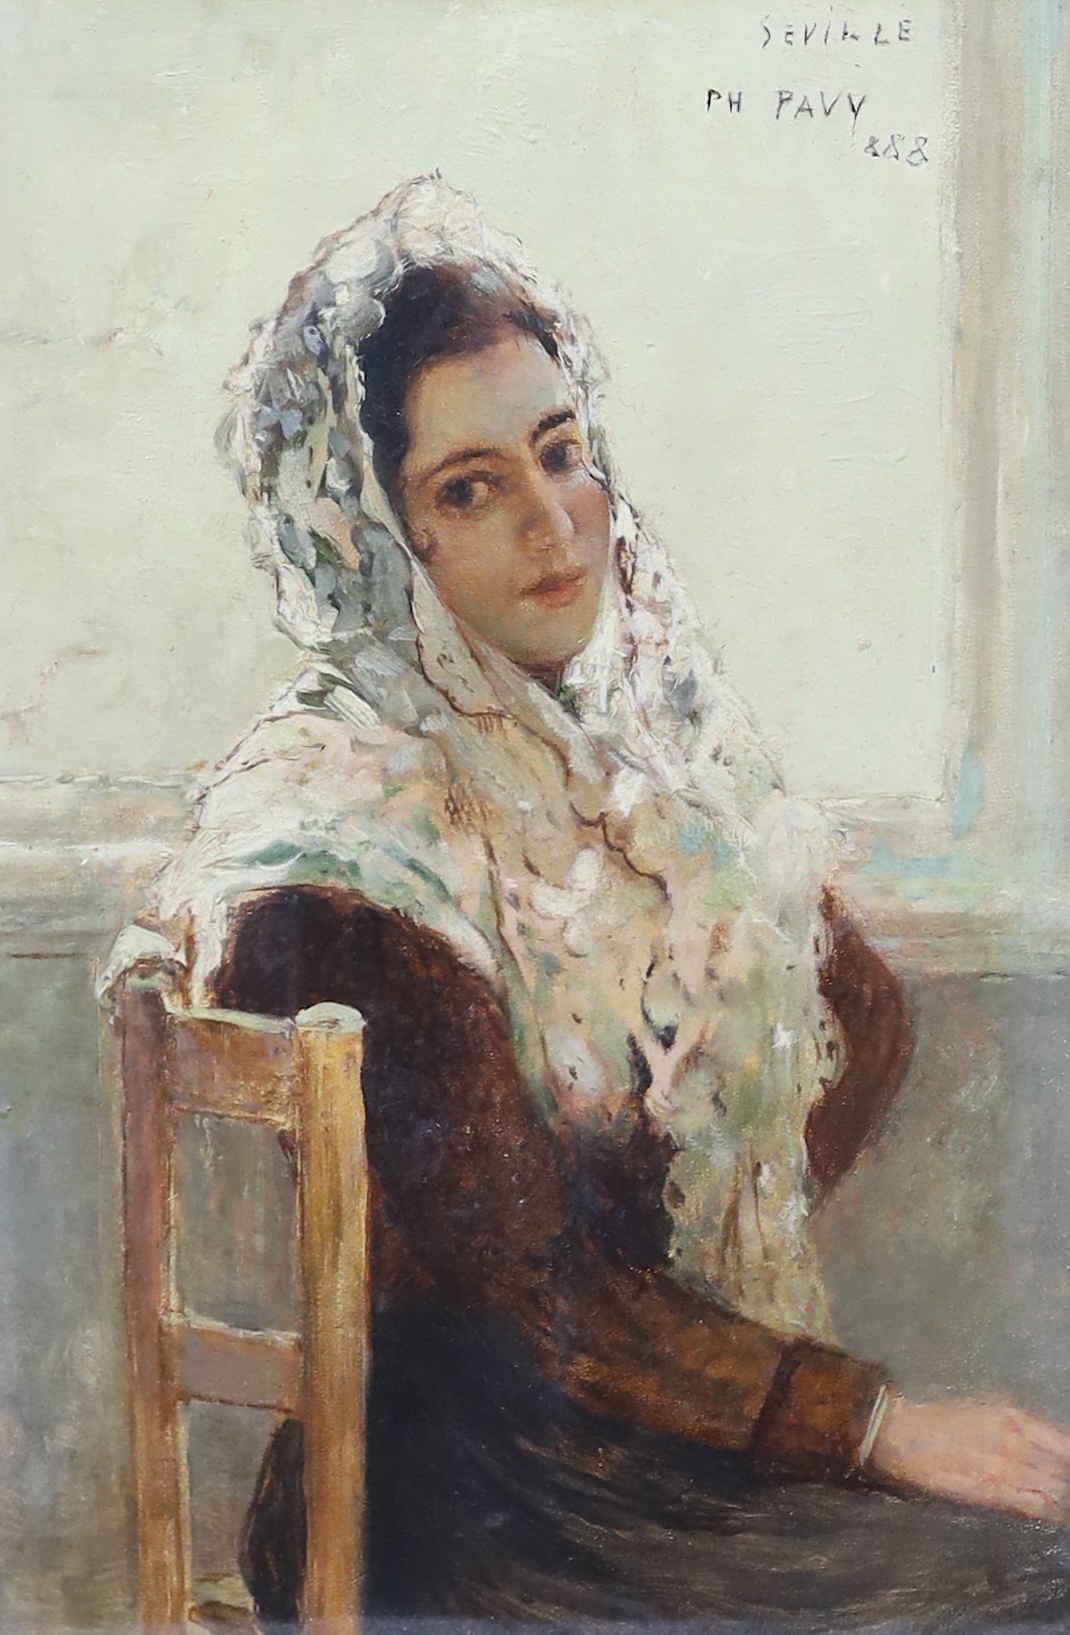 Philippe Pavy (French, 1860-c.1920), Portrait of a seated Spanish woman, oil on canvas, 26 x 17cm